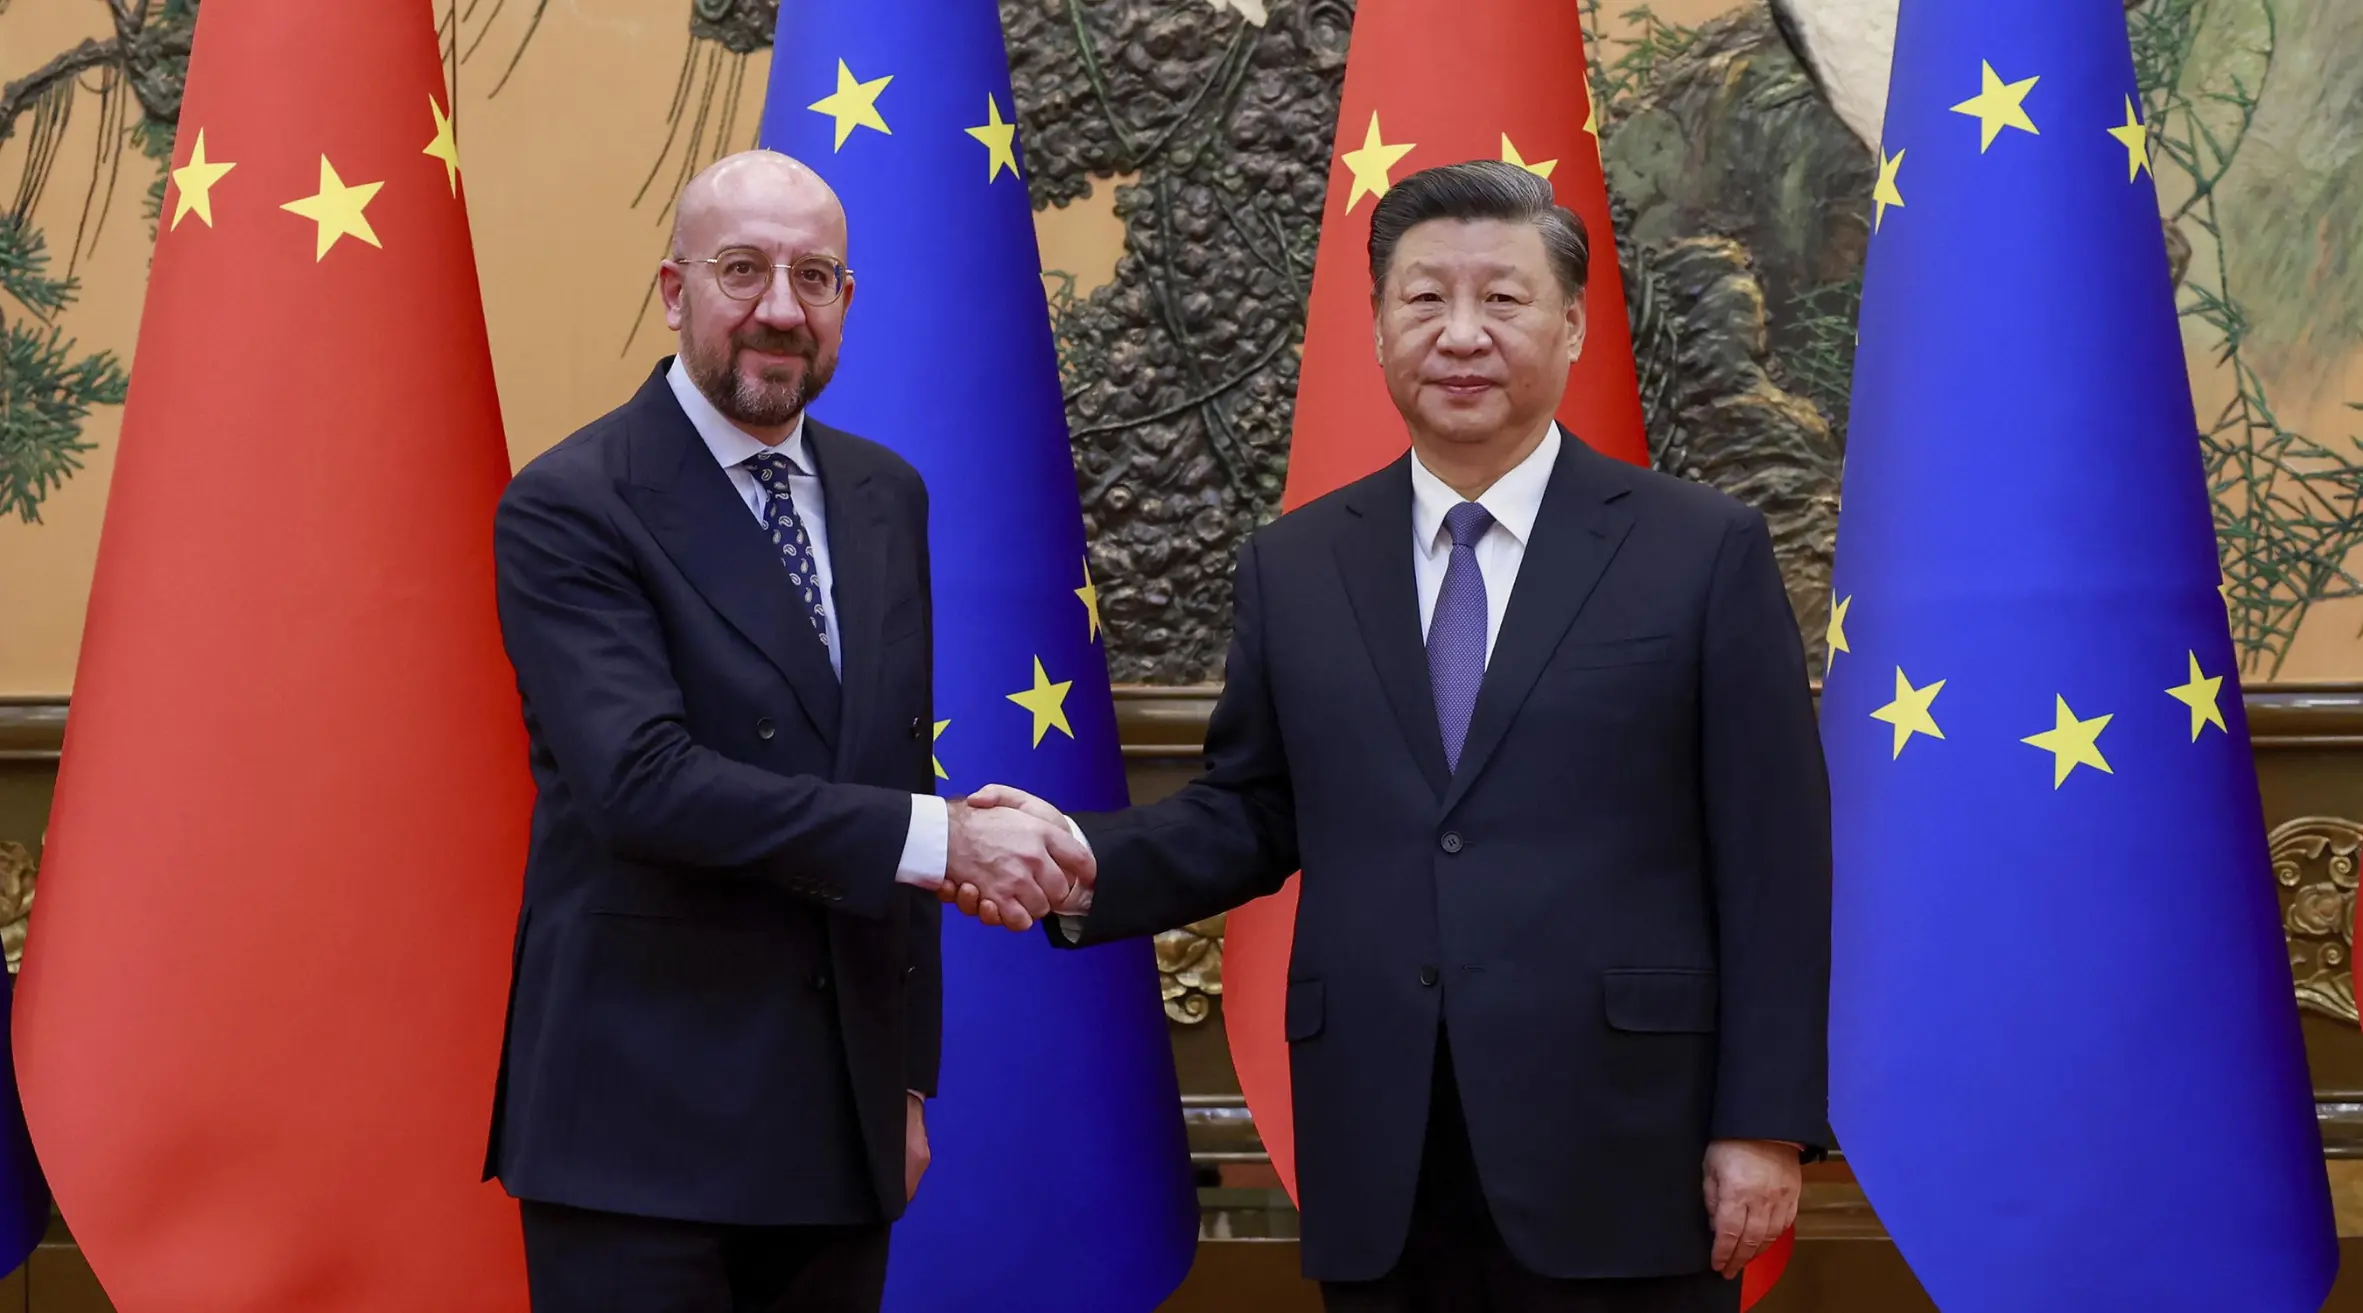 Chinese President Xi Jinping welcomes EU Council's incoming president